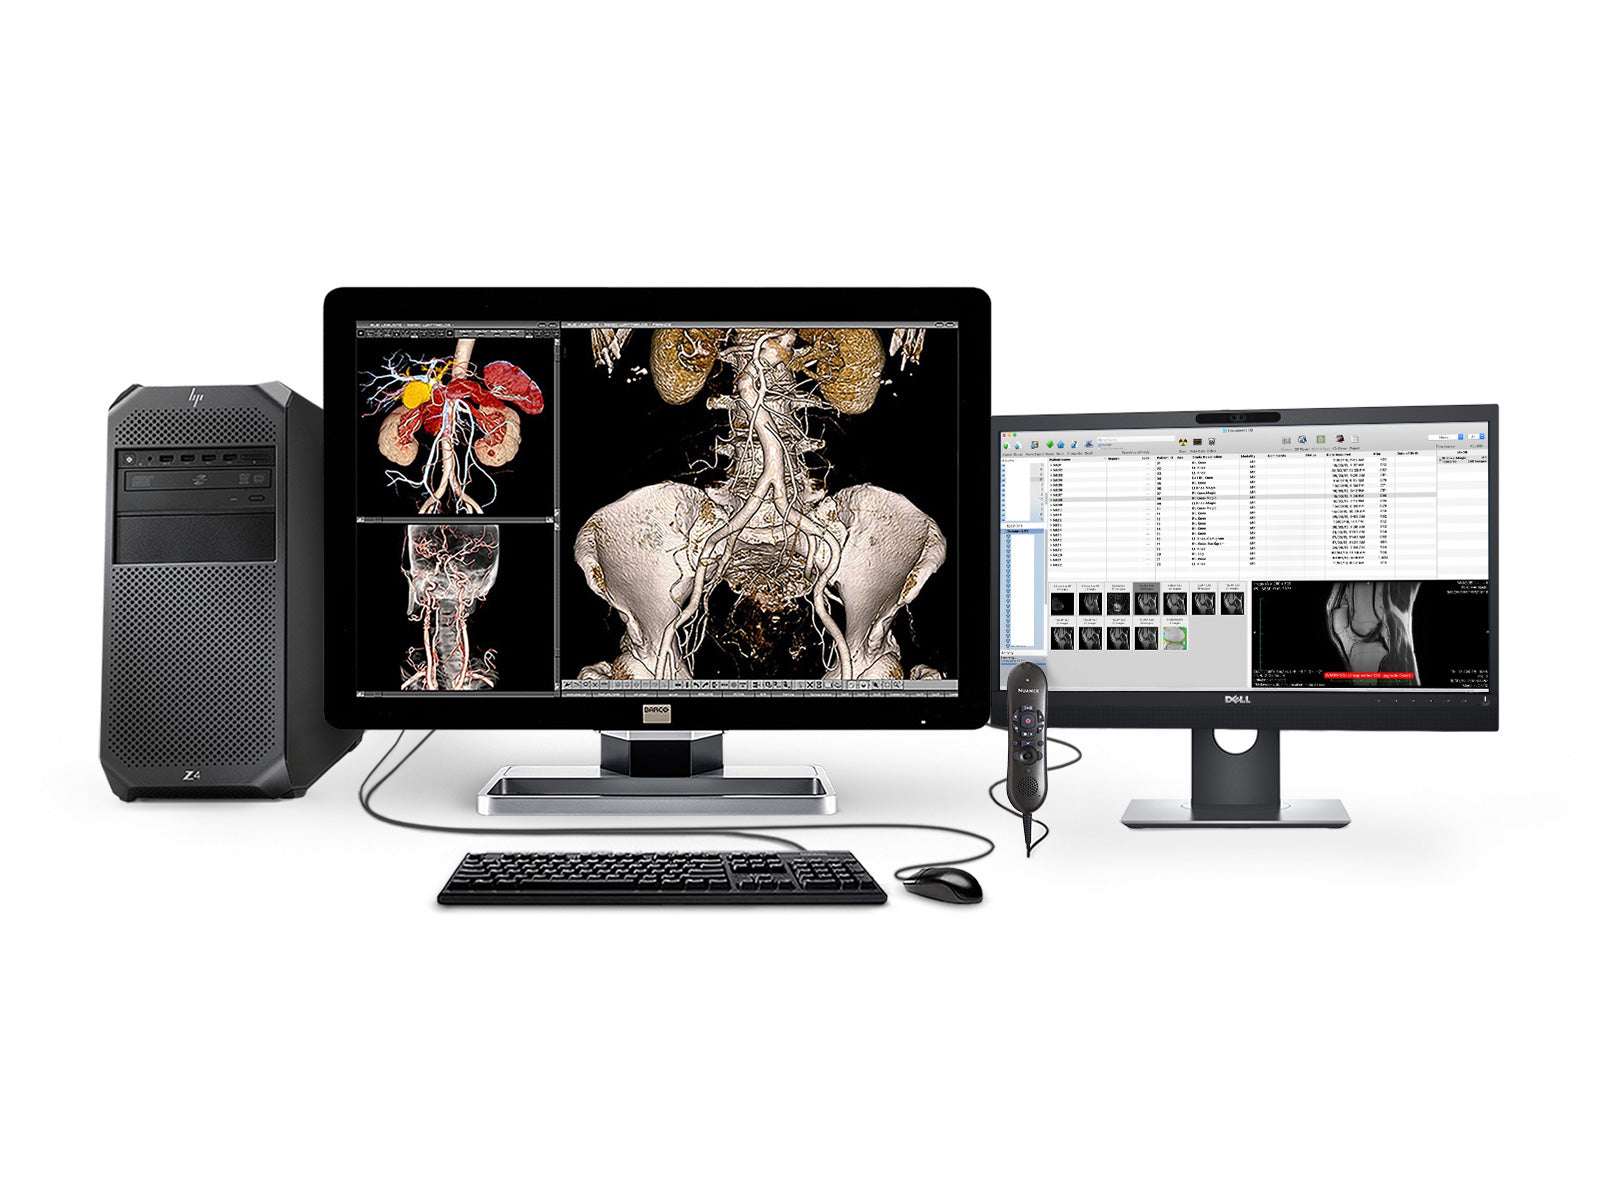 Complete PACS General Radiology Station | HP Workstation